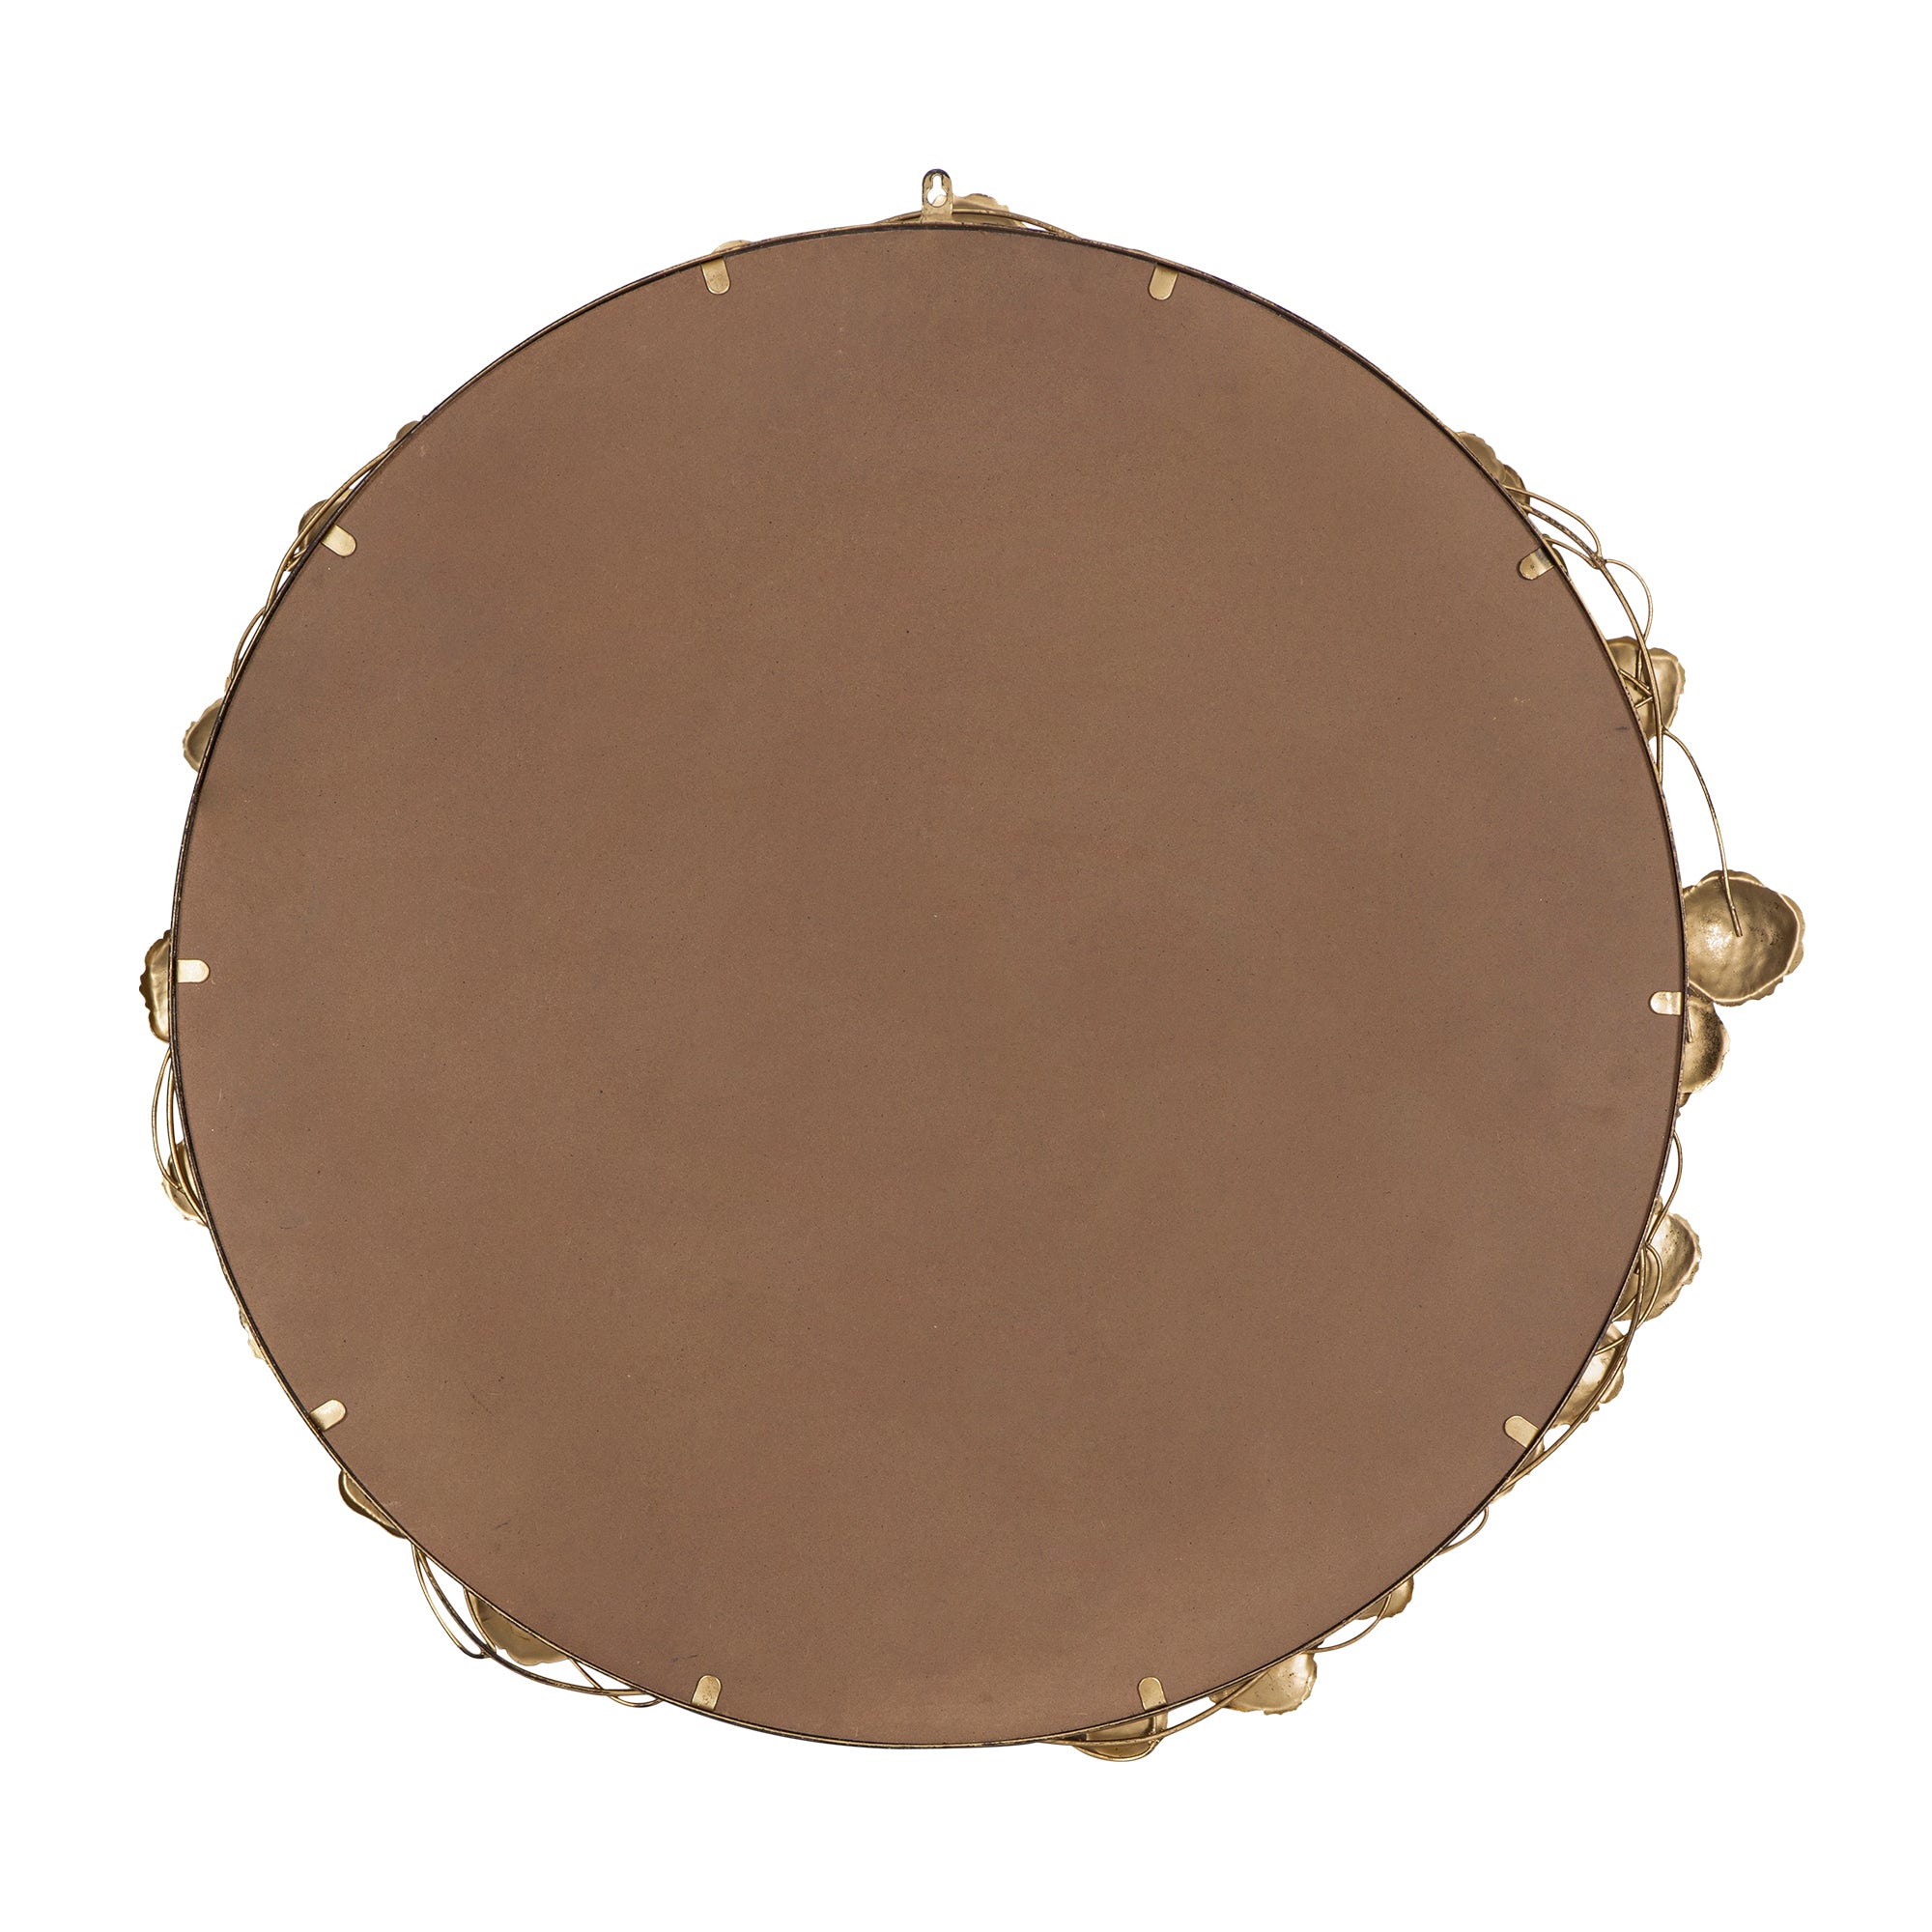 35" Round Metal Wall Mirror with Golden Leaf Accents gold-iron